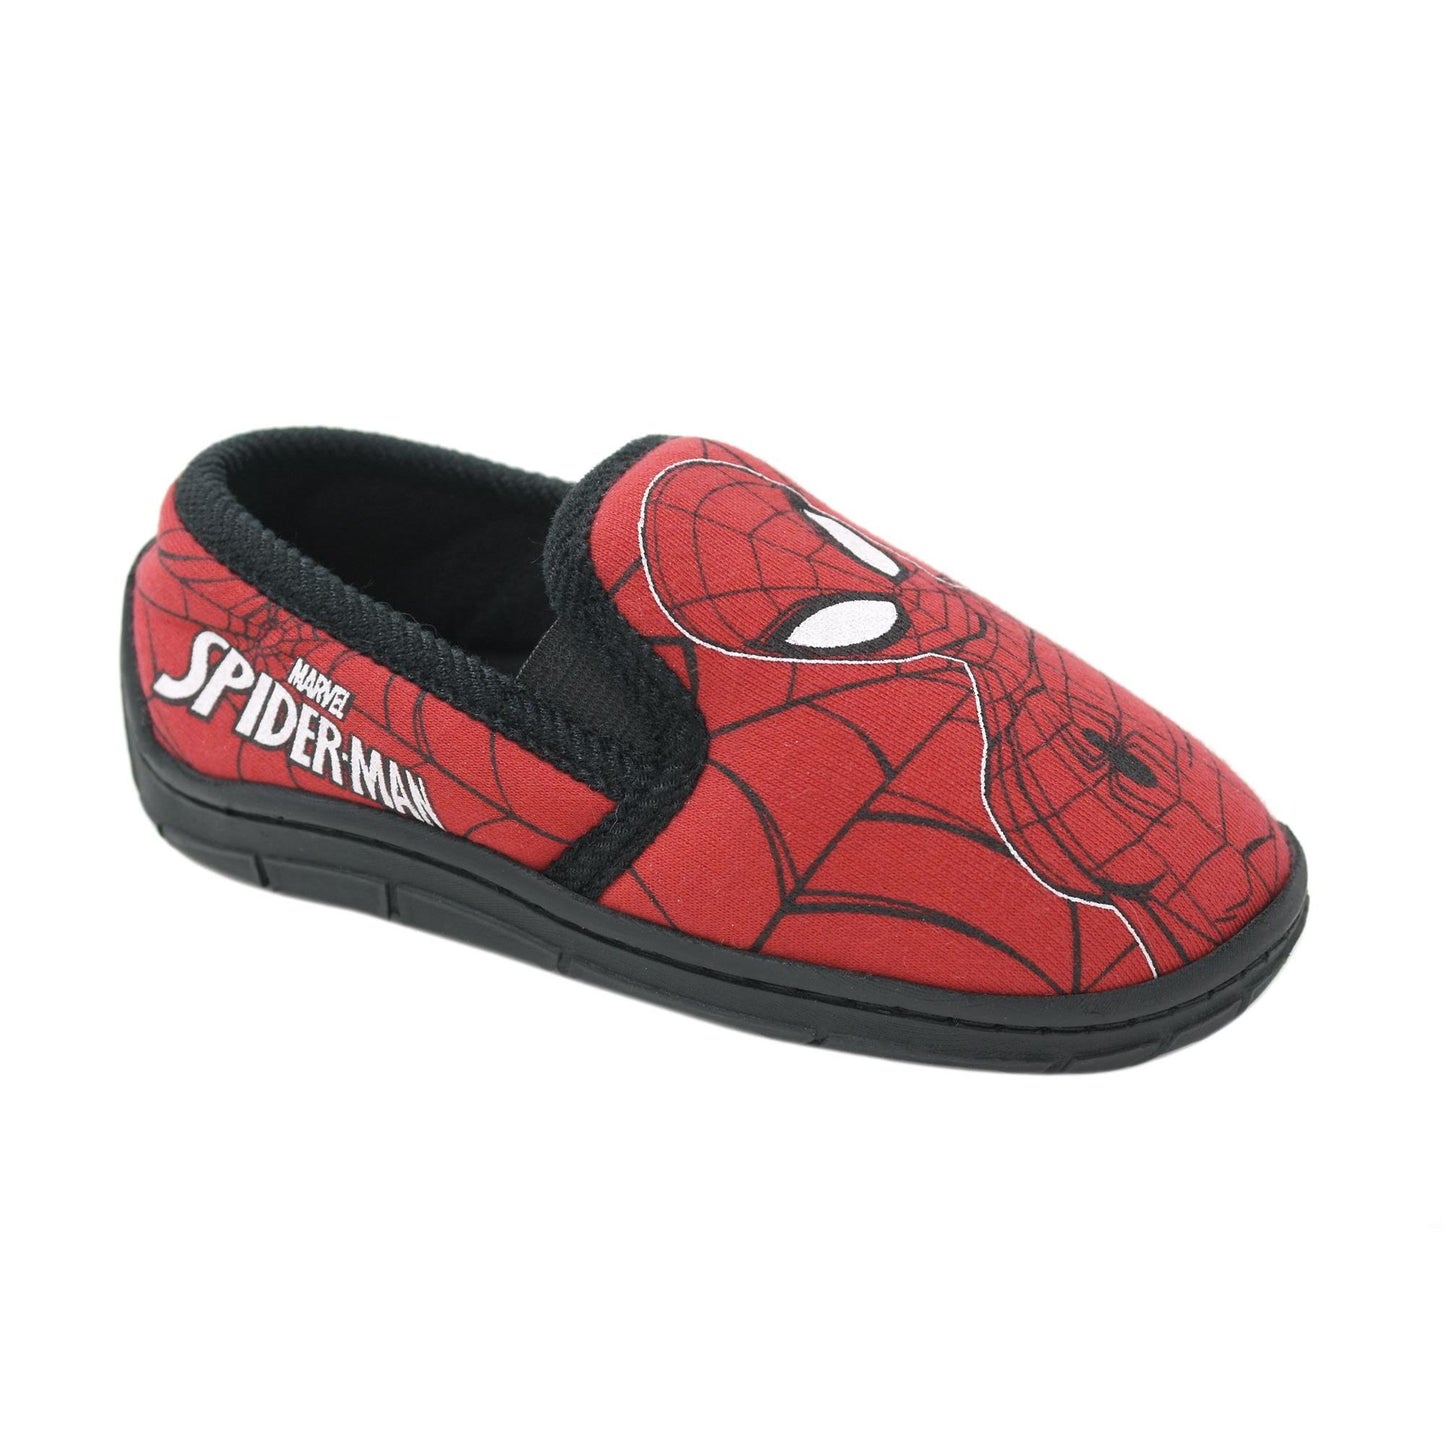 Childs Red and Black Spiderman Slippers